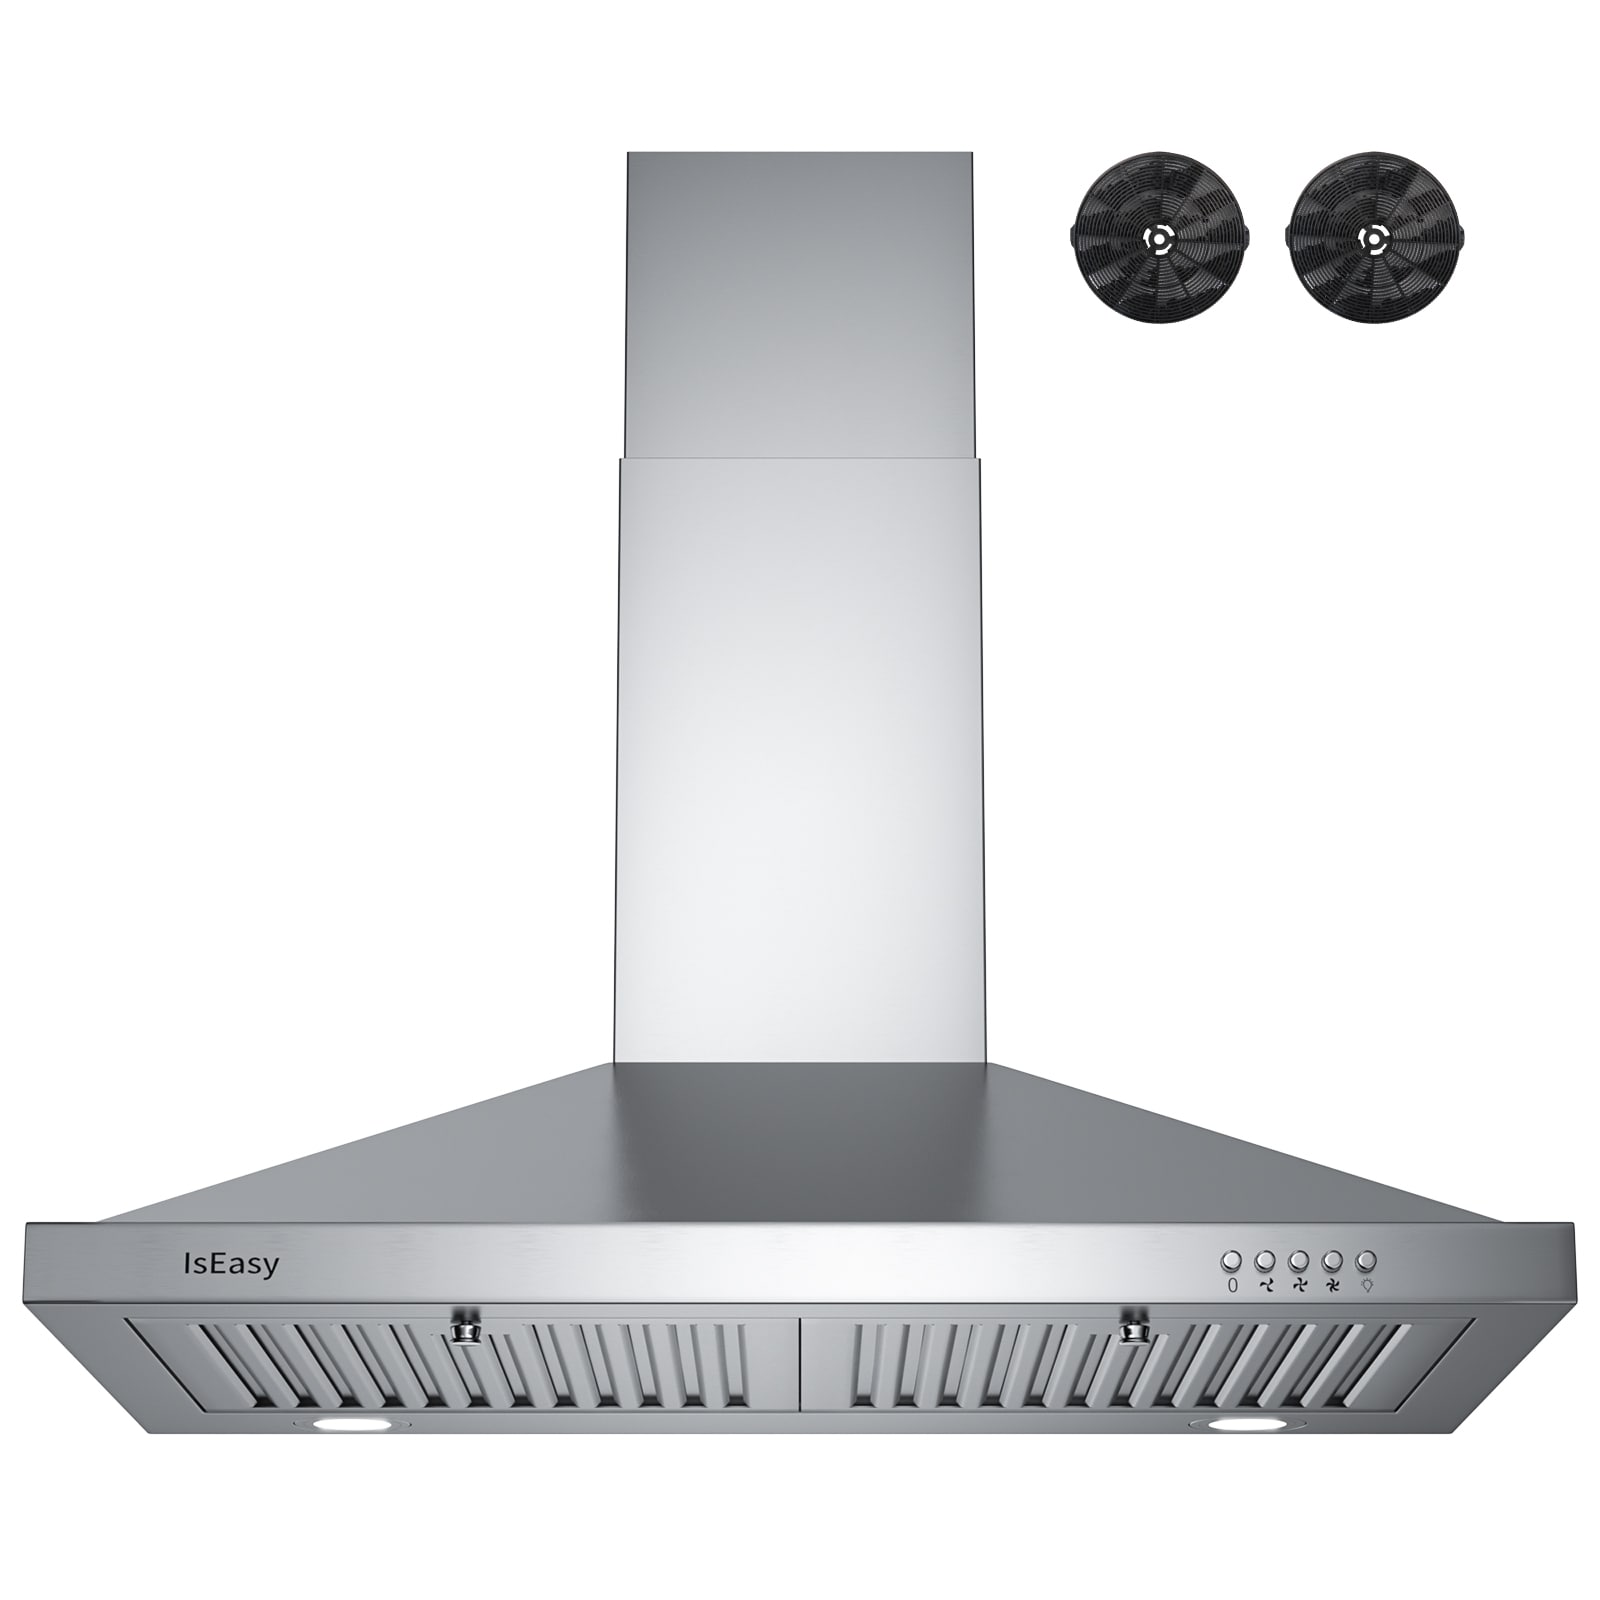  Range Hood Insert 30 inch, IsEasy Built-in Kitchen Hood With  600 CFM, Ducted/Ductless Convertible Range Hood Stainless Steel Vent Hood  Insert, Charcoal Filters & Vent Hose included : Appliances